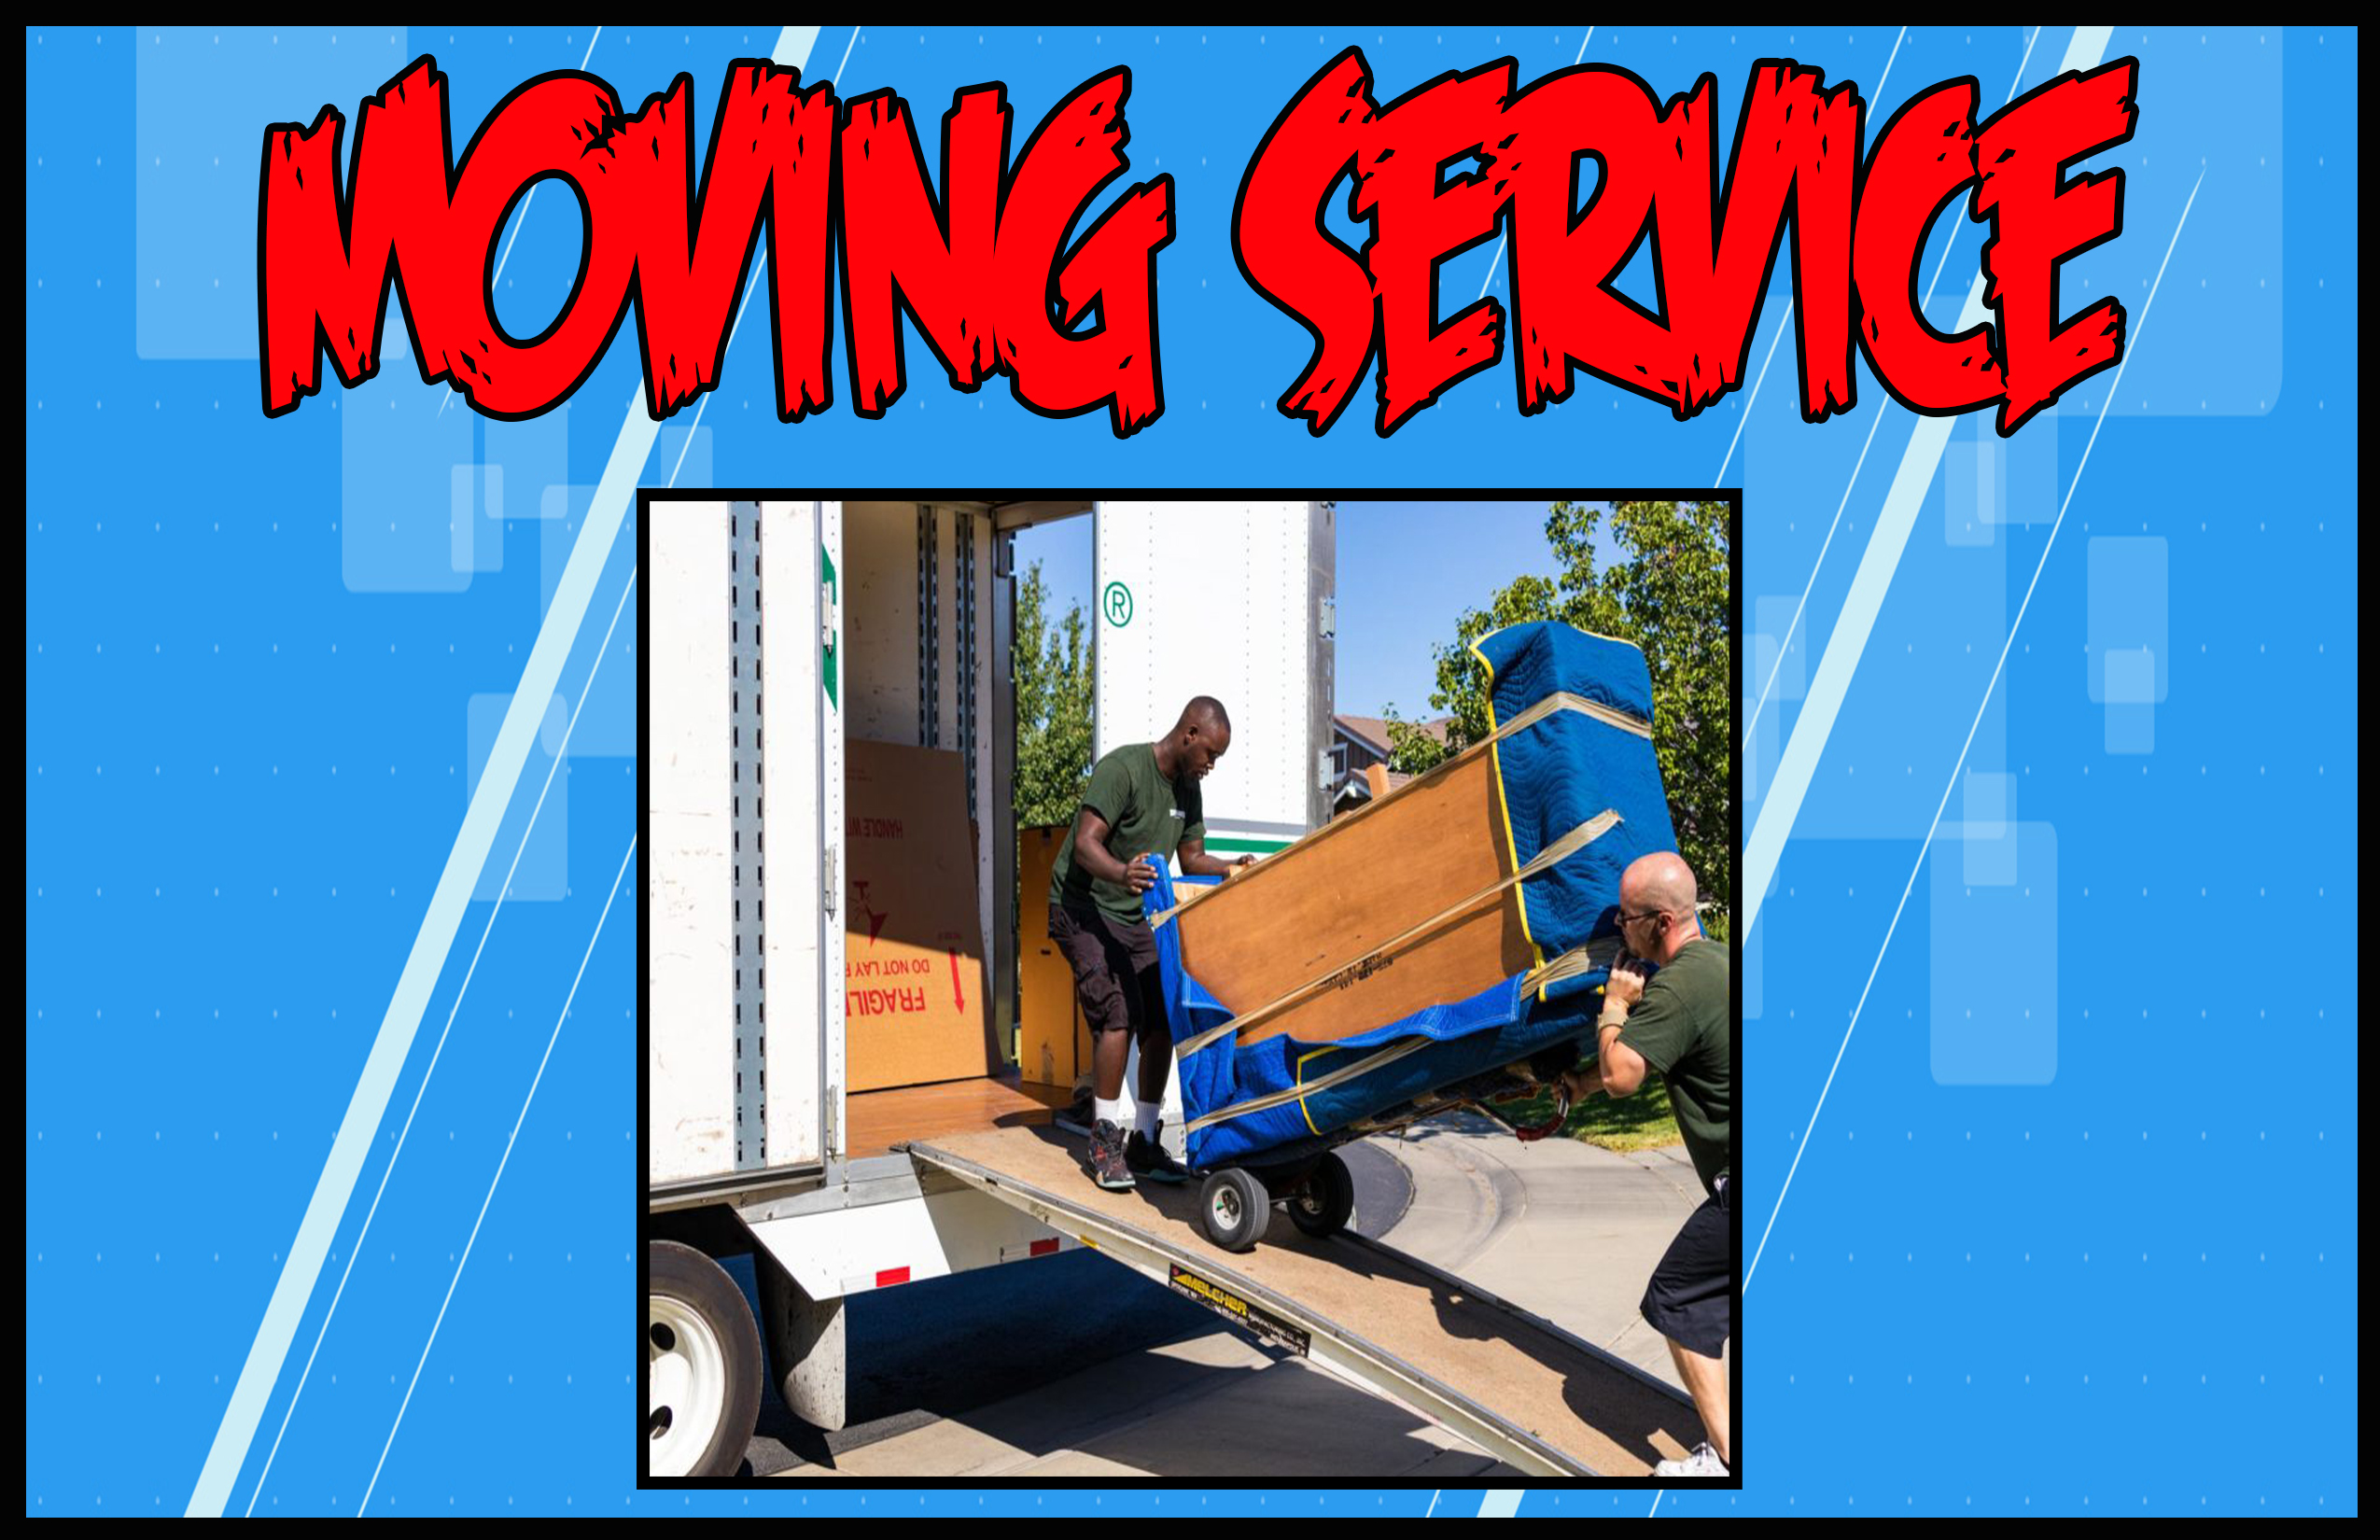 Book Moving Service